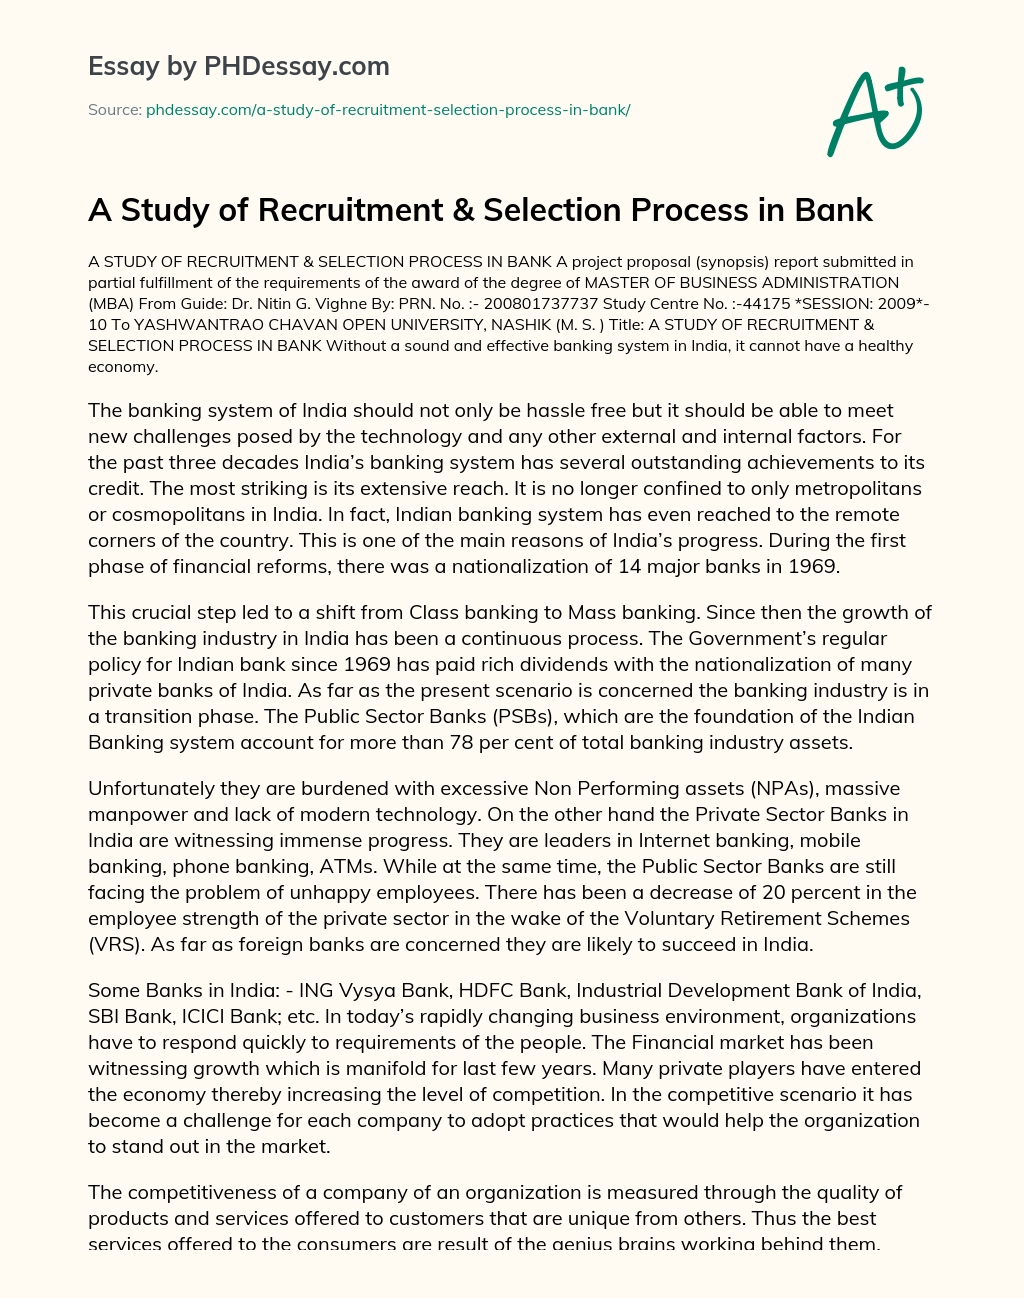 A Study of Recruitment & Selection Process in Bank essay